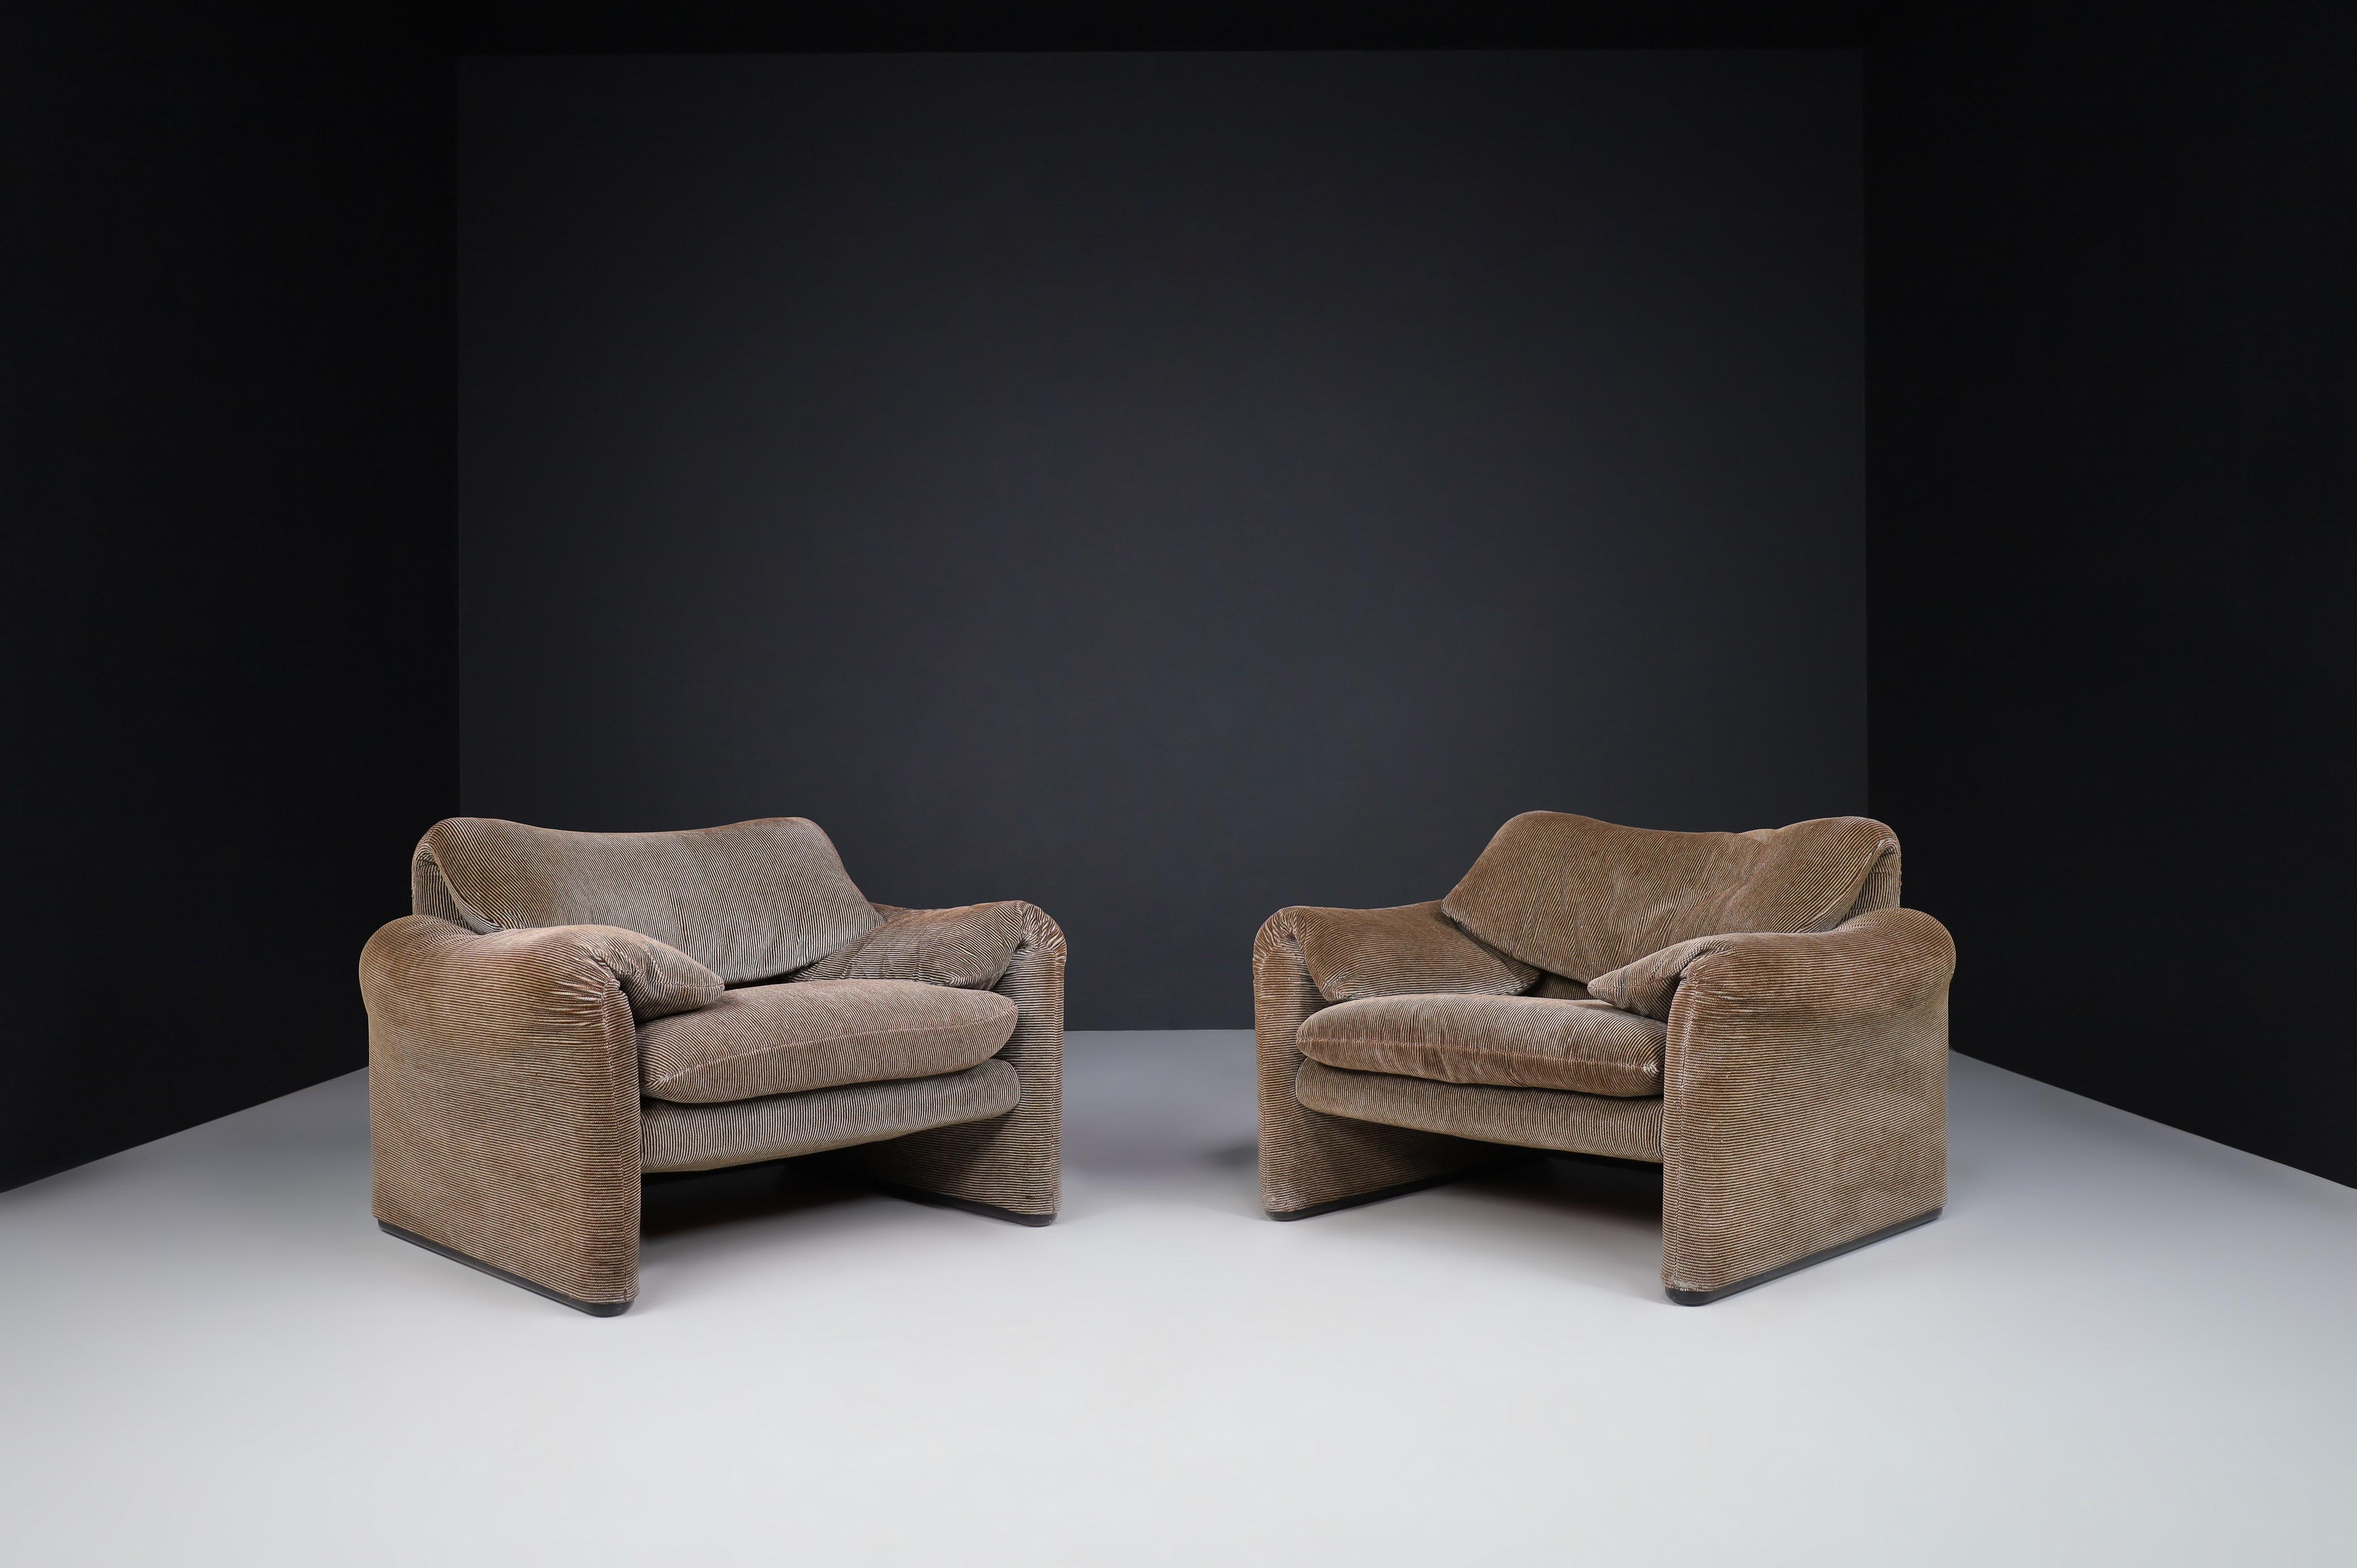 Maralunga lounge chairs by Vico Magistretti for Cassina, 1970s

An exemplary version of the iconic Maralunga lounge chairs in original vintage fabric. The overall impression of these four lounge chairs is excellent. Please note that the material